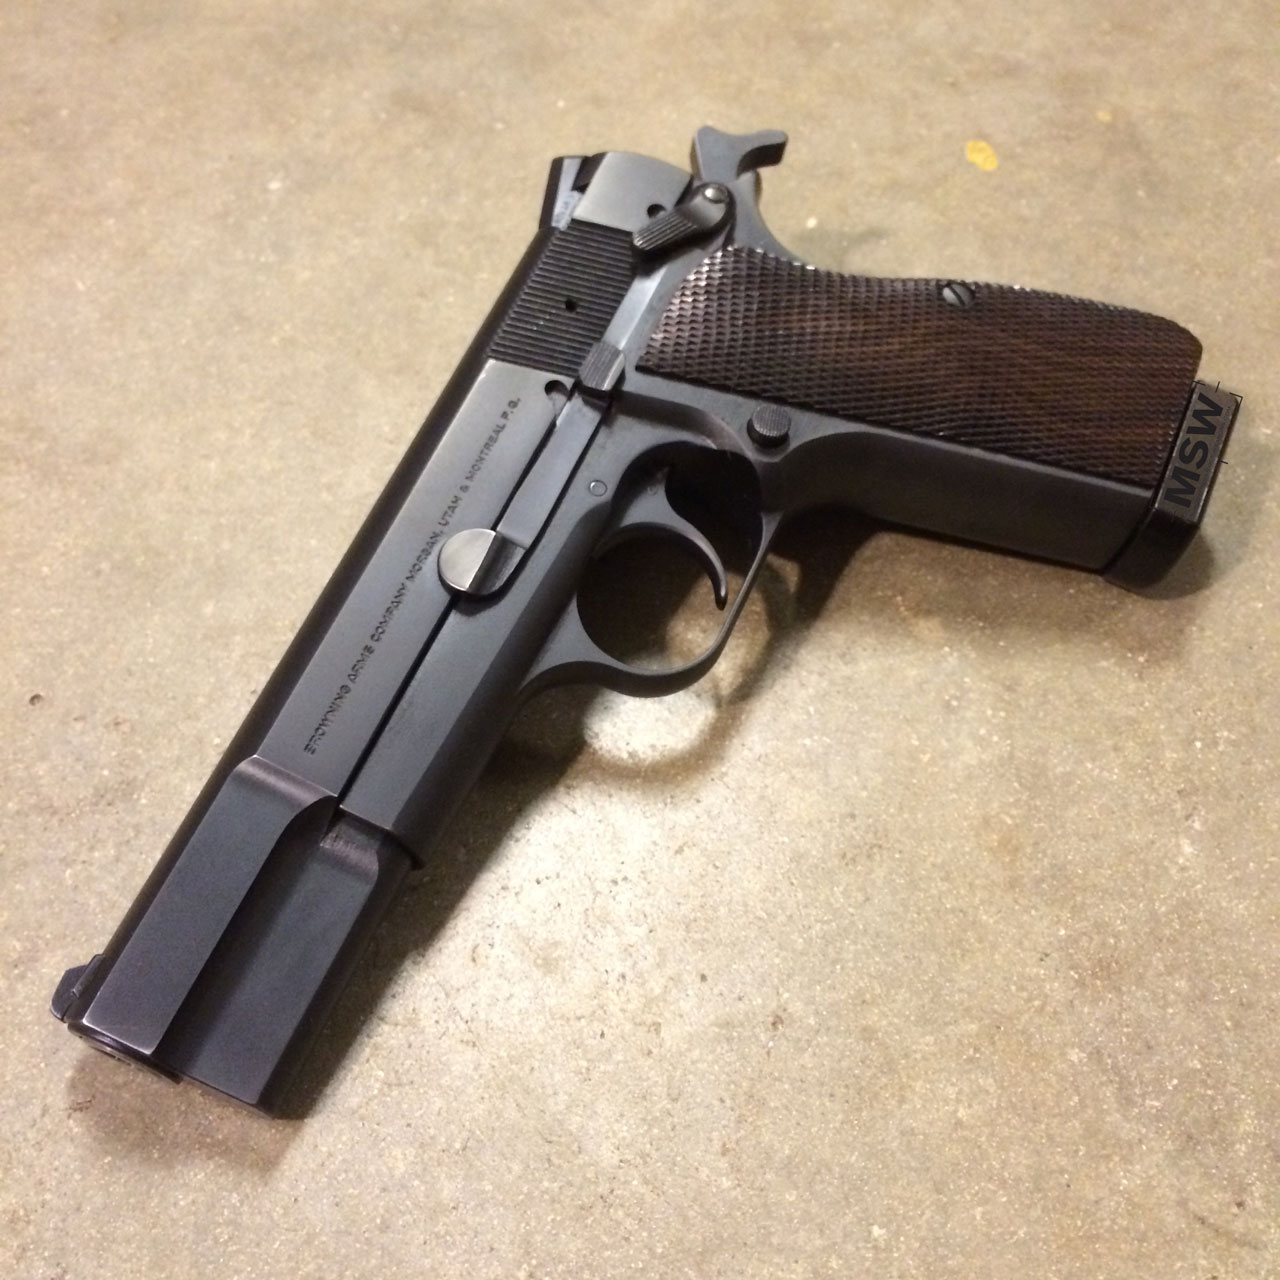 Return to The Browning Hi Power: Yesterday’s 9mm Service Pistol. 